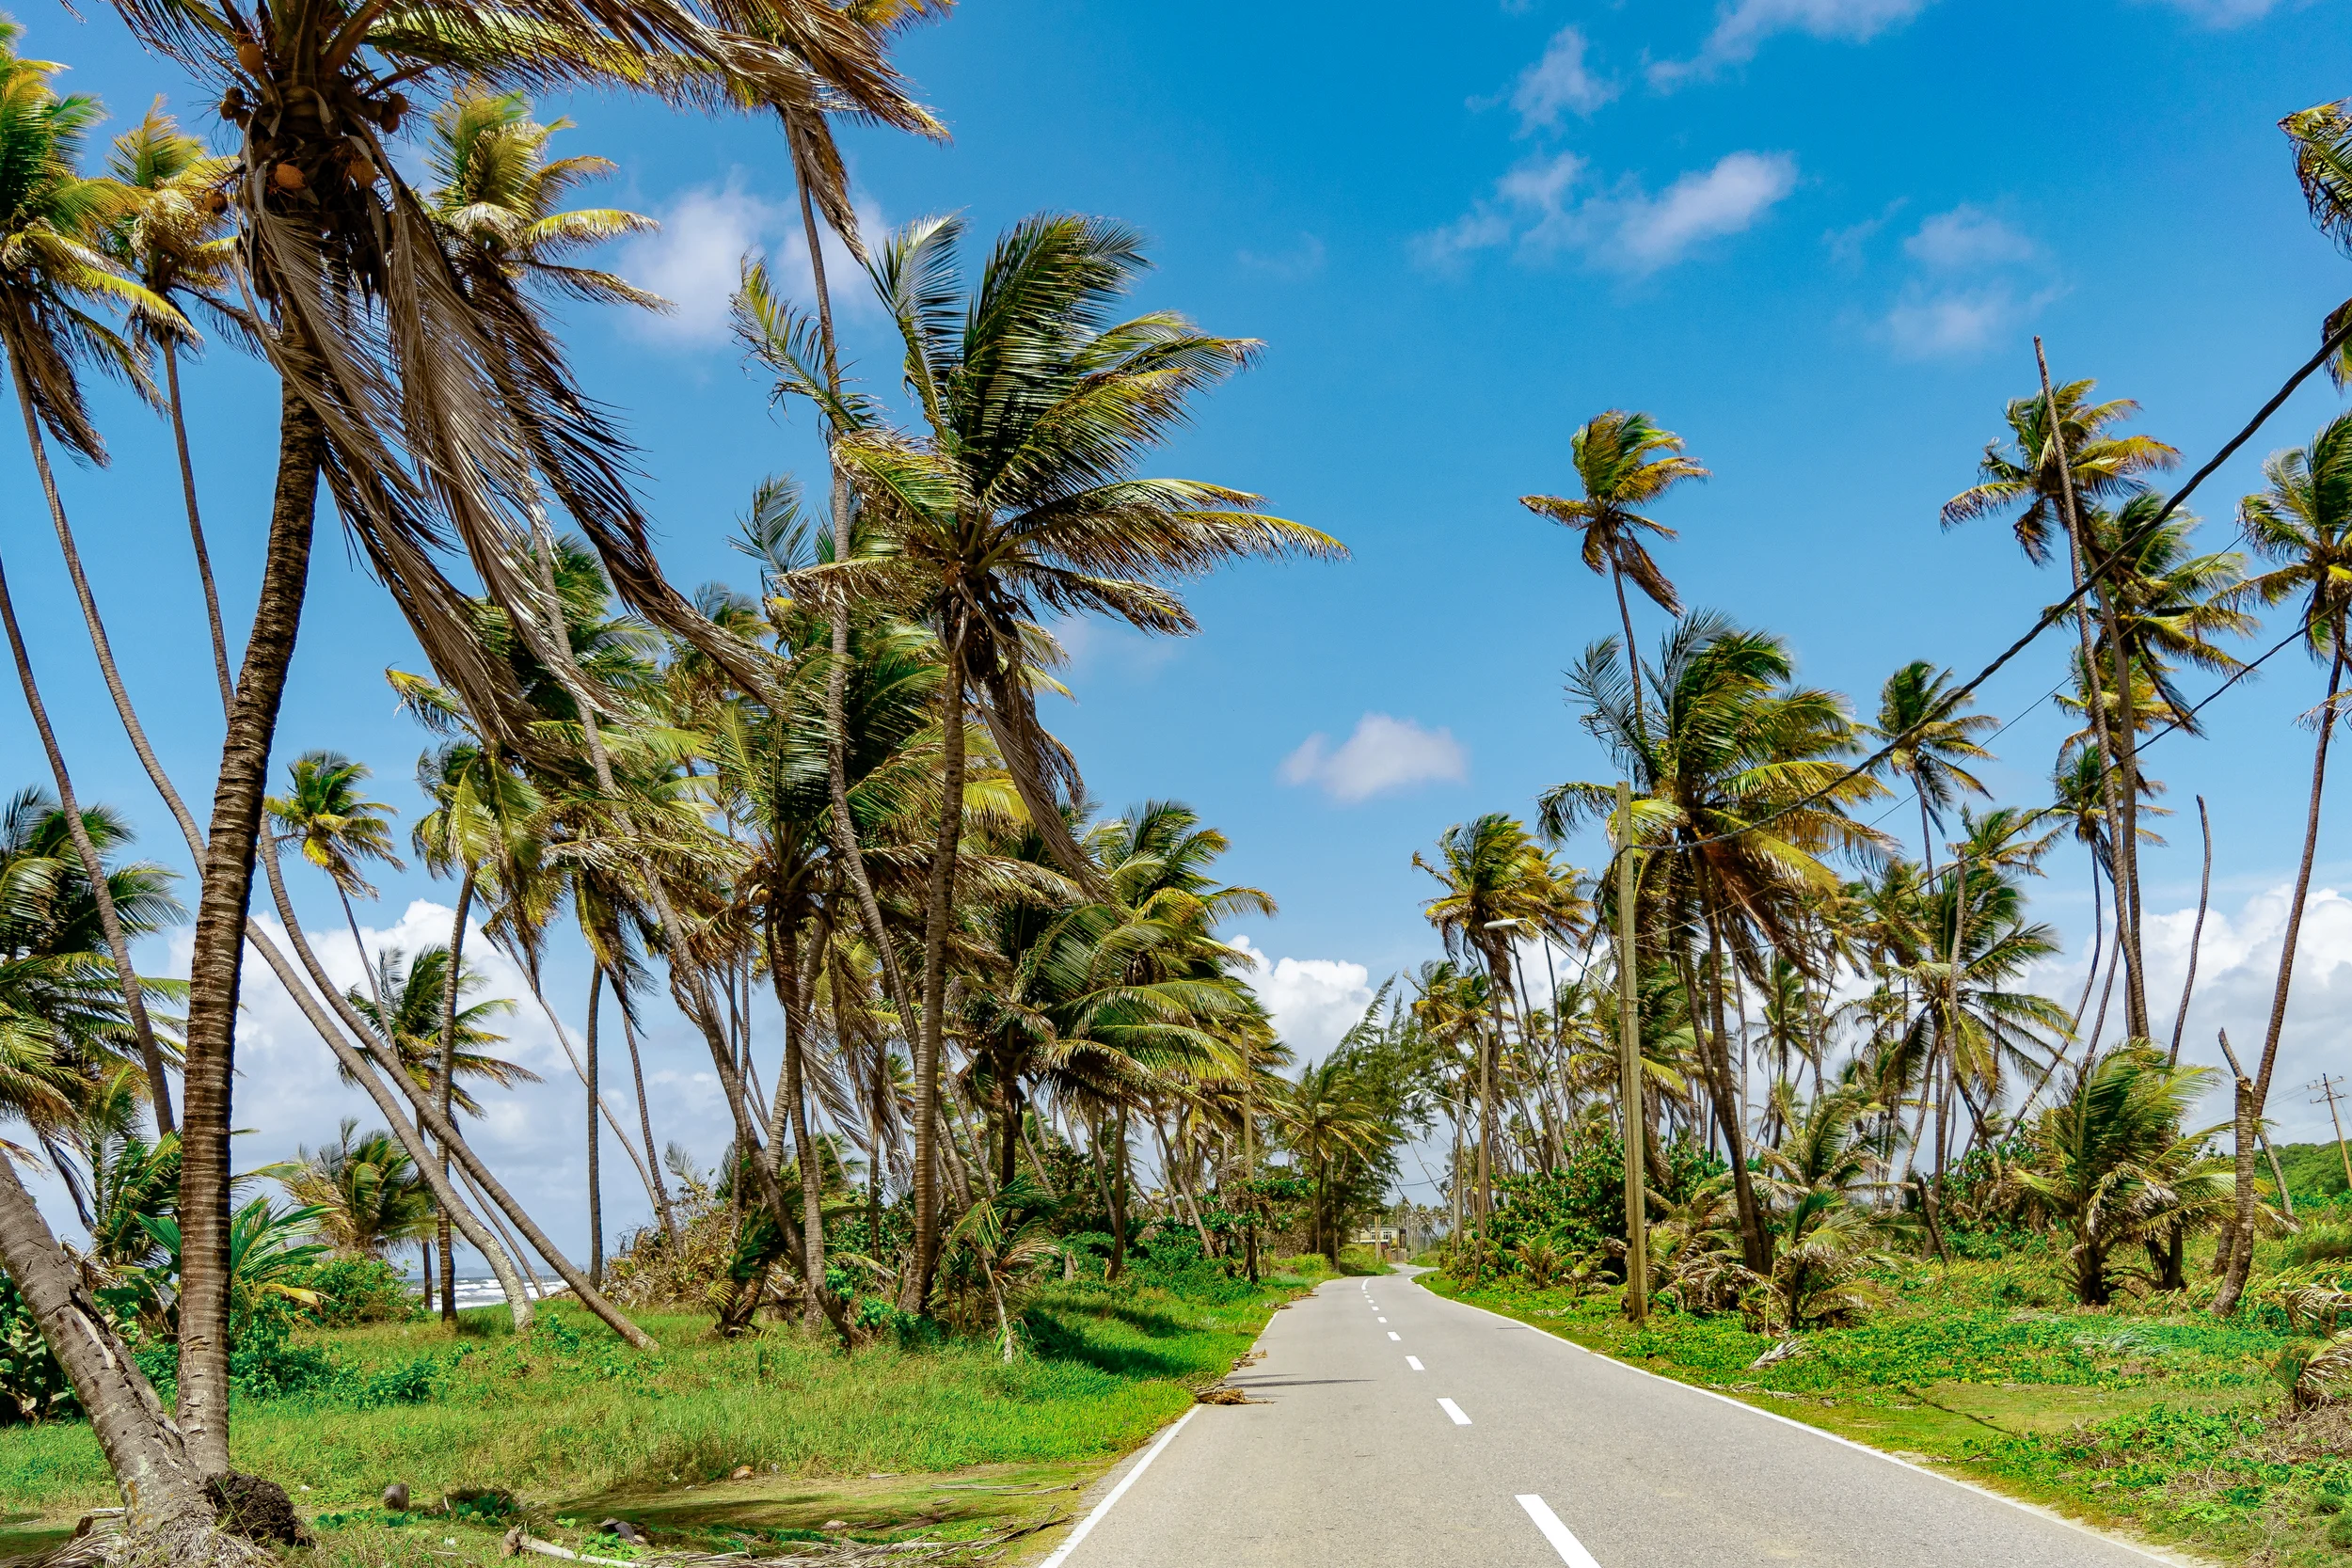 Road with palm trees on the side